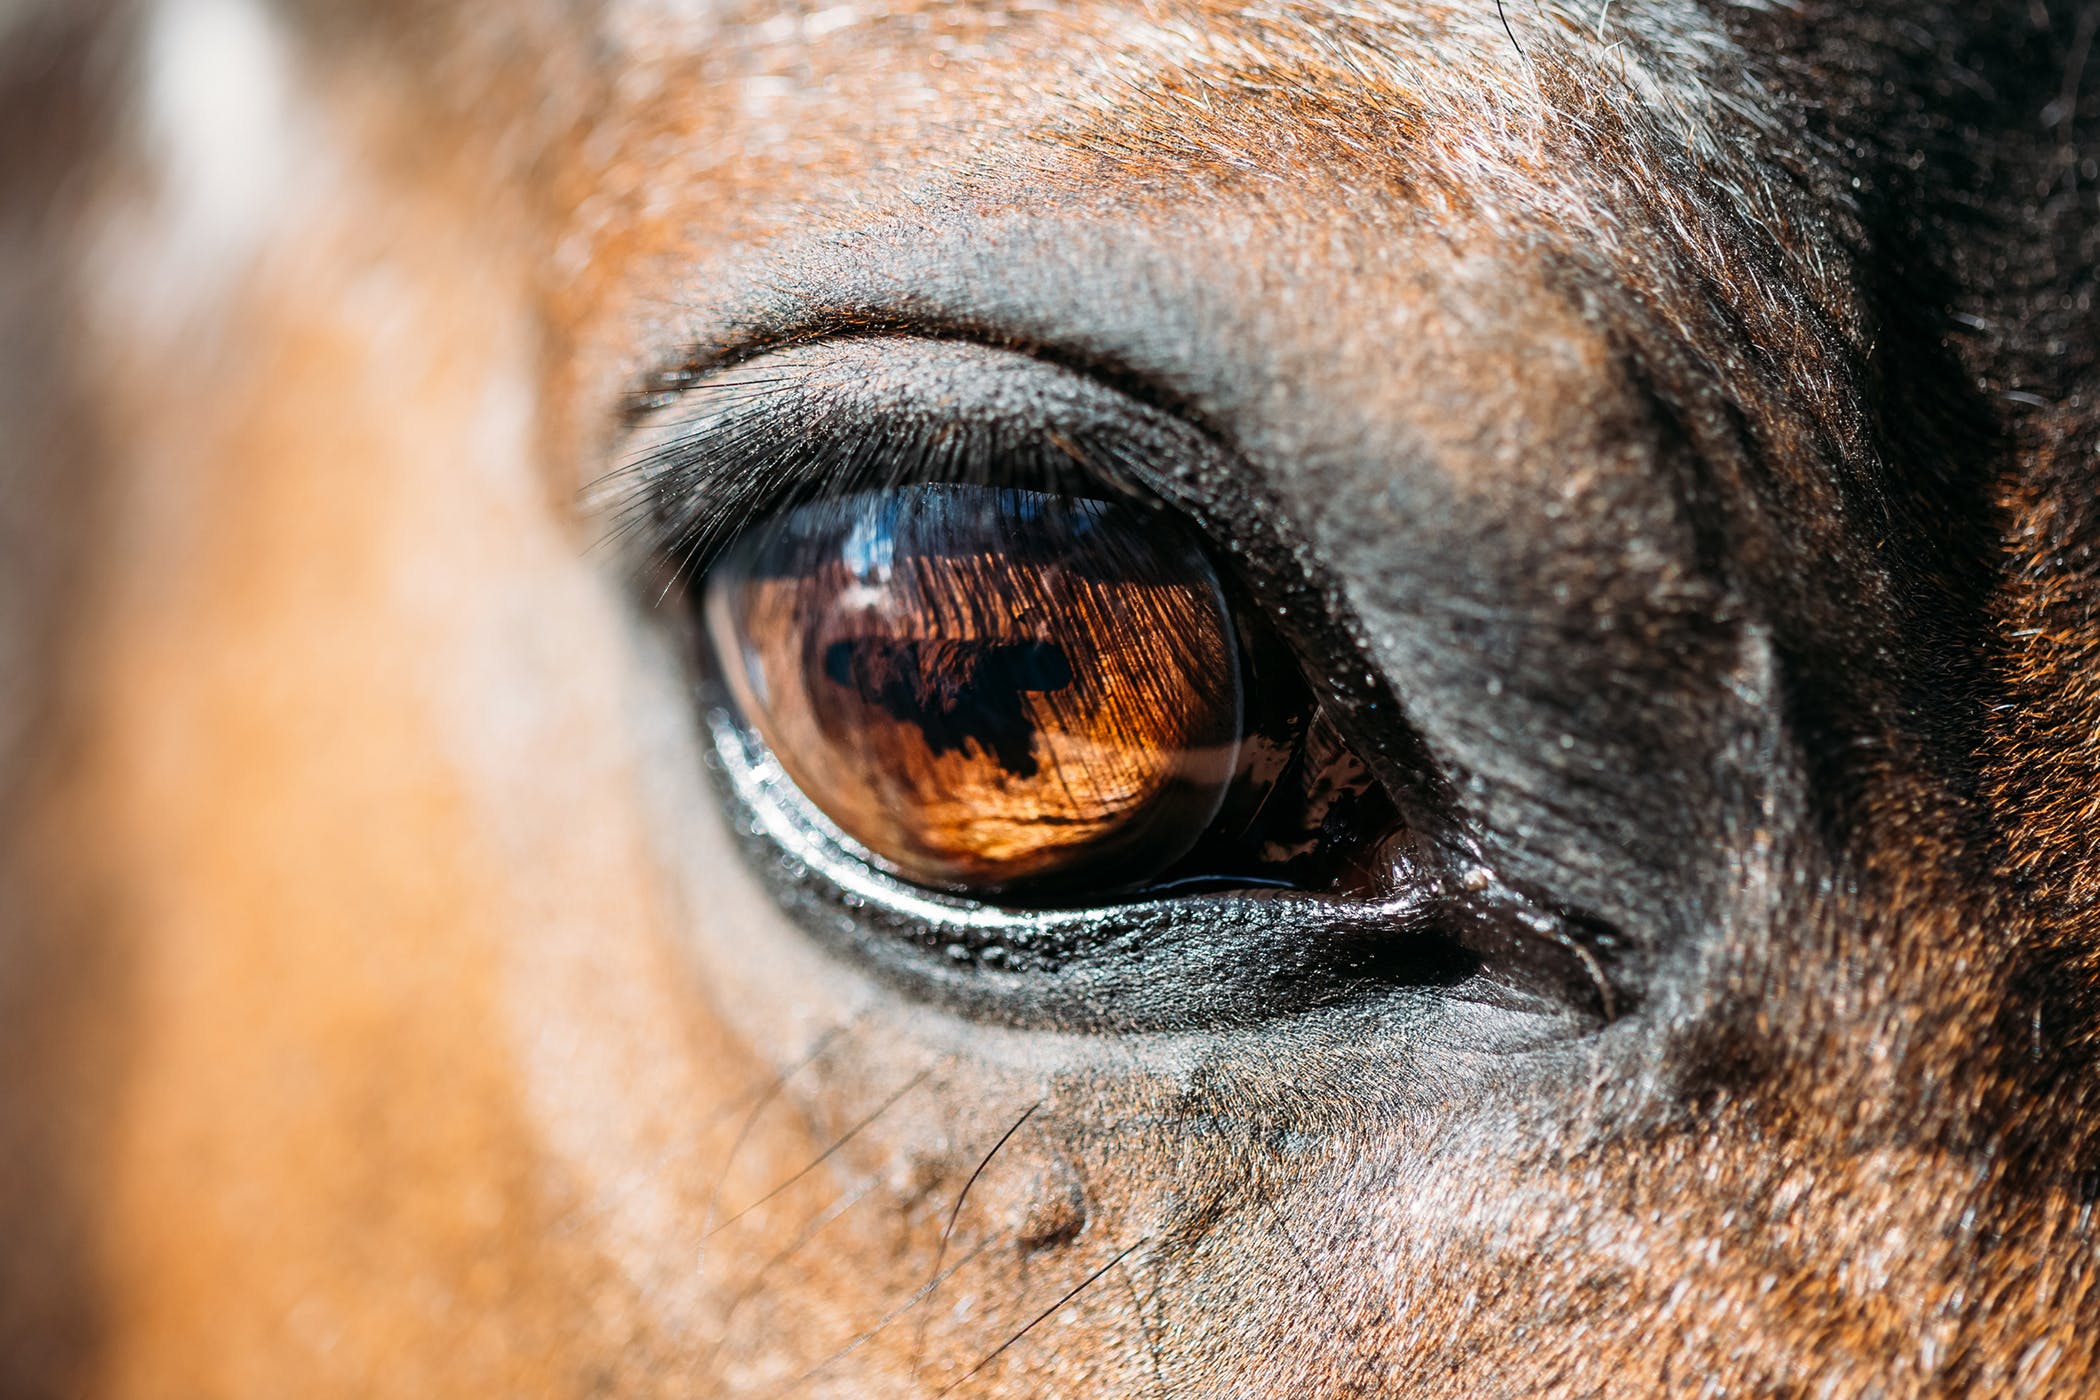 Corneal Ulcers in Horses - Symptoms, Causes, Diagnosis, Treatment ...